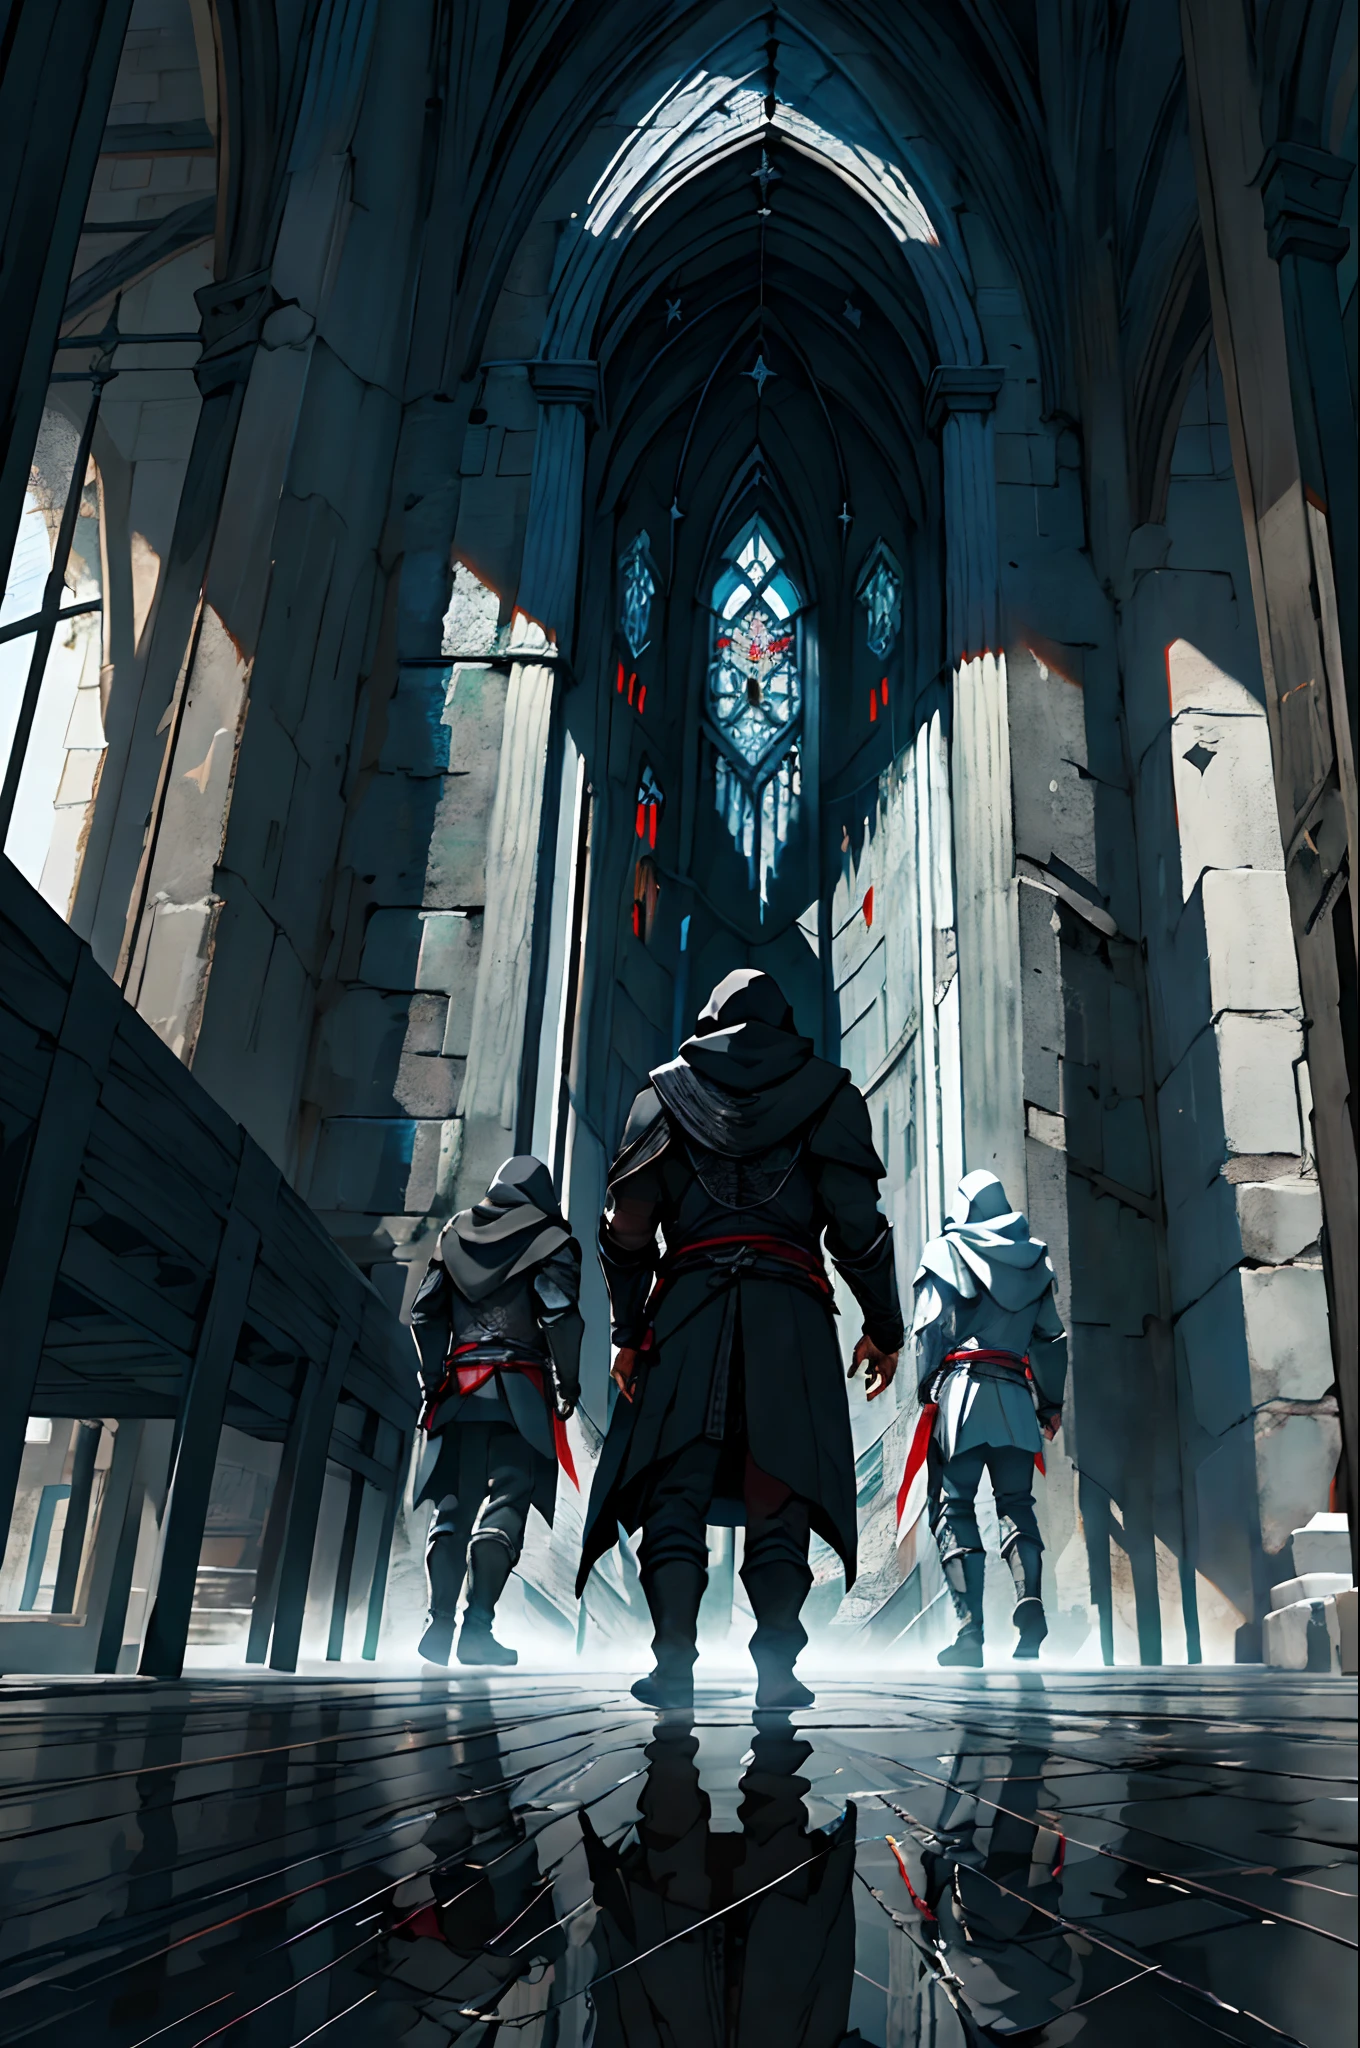 1men use long black hoodies with the Assassin's Creed Brotherhood theme, medieval, light reflection, focus, aesthetic, fantasy